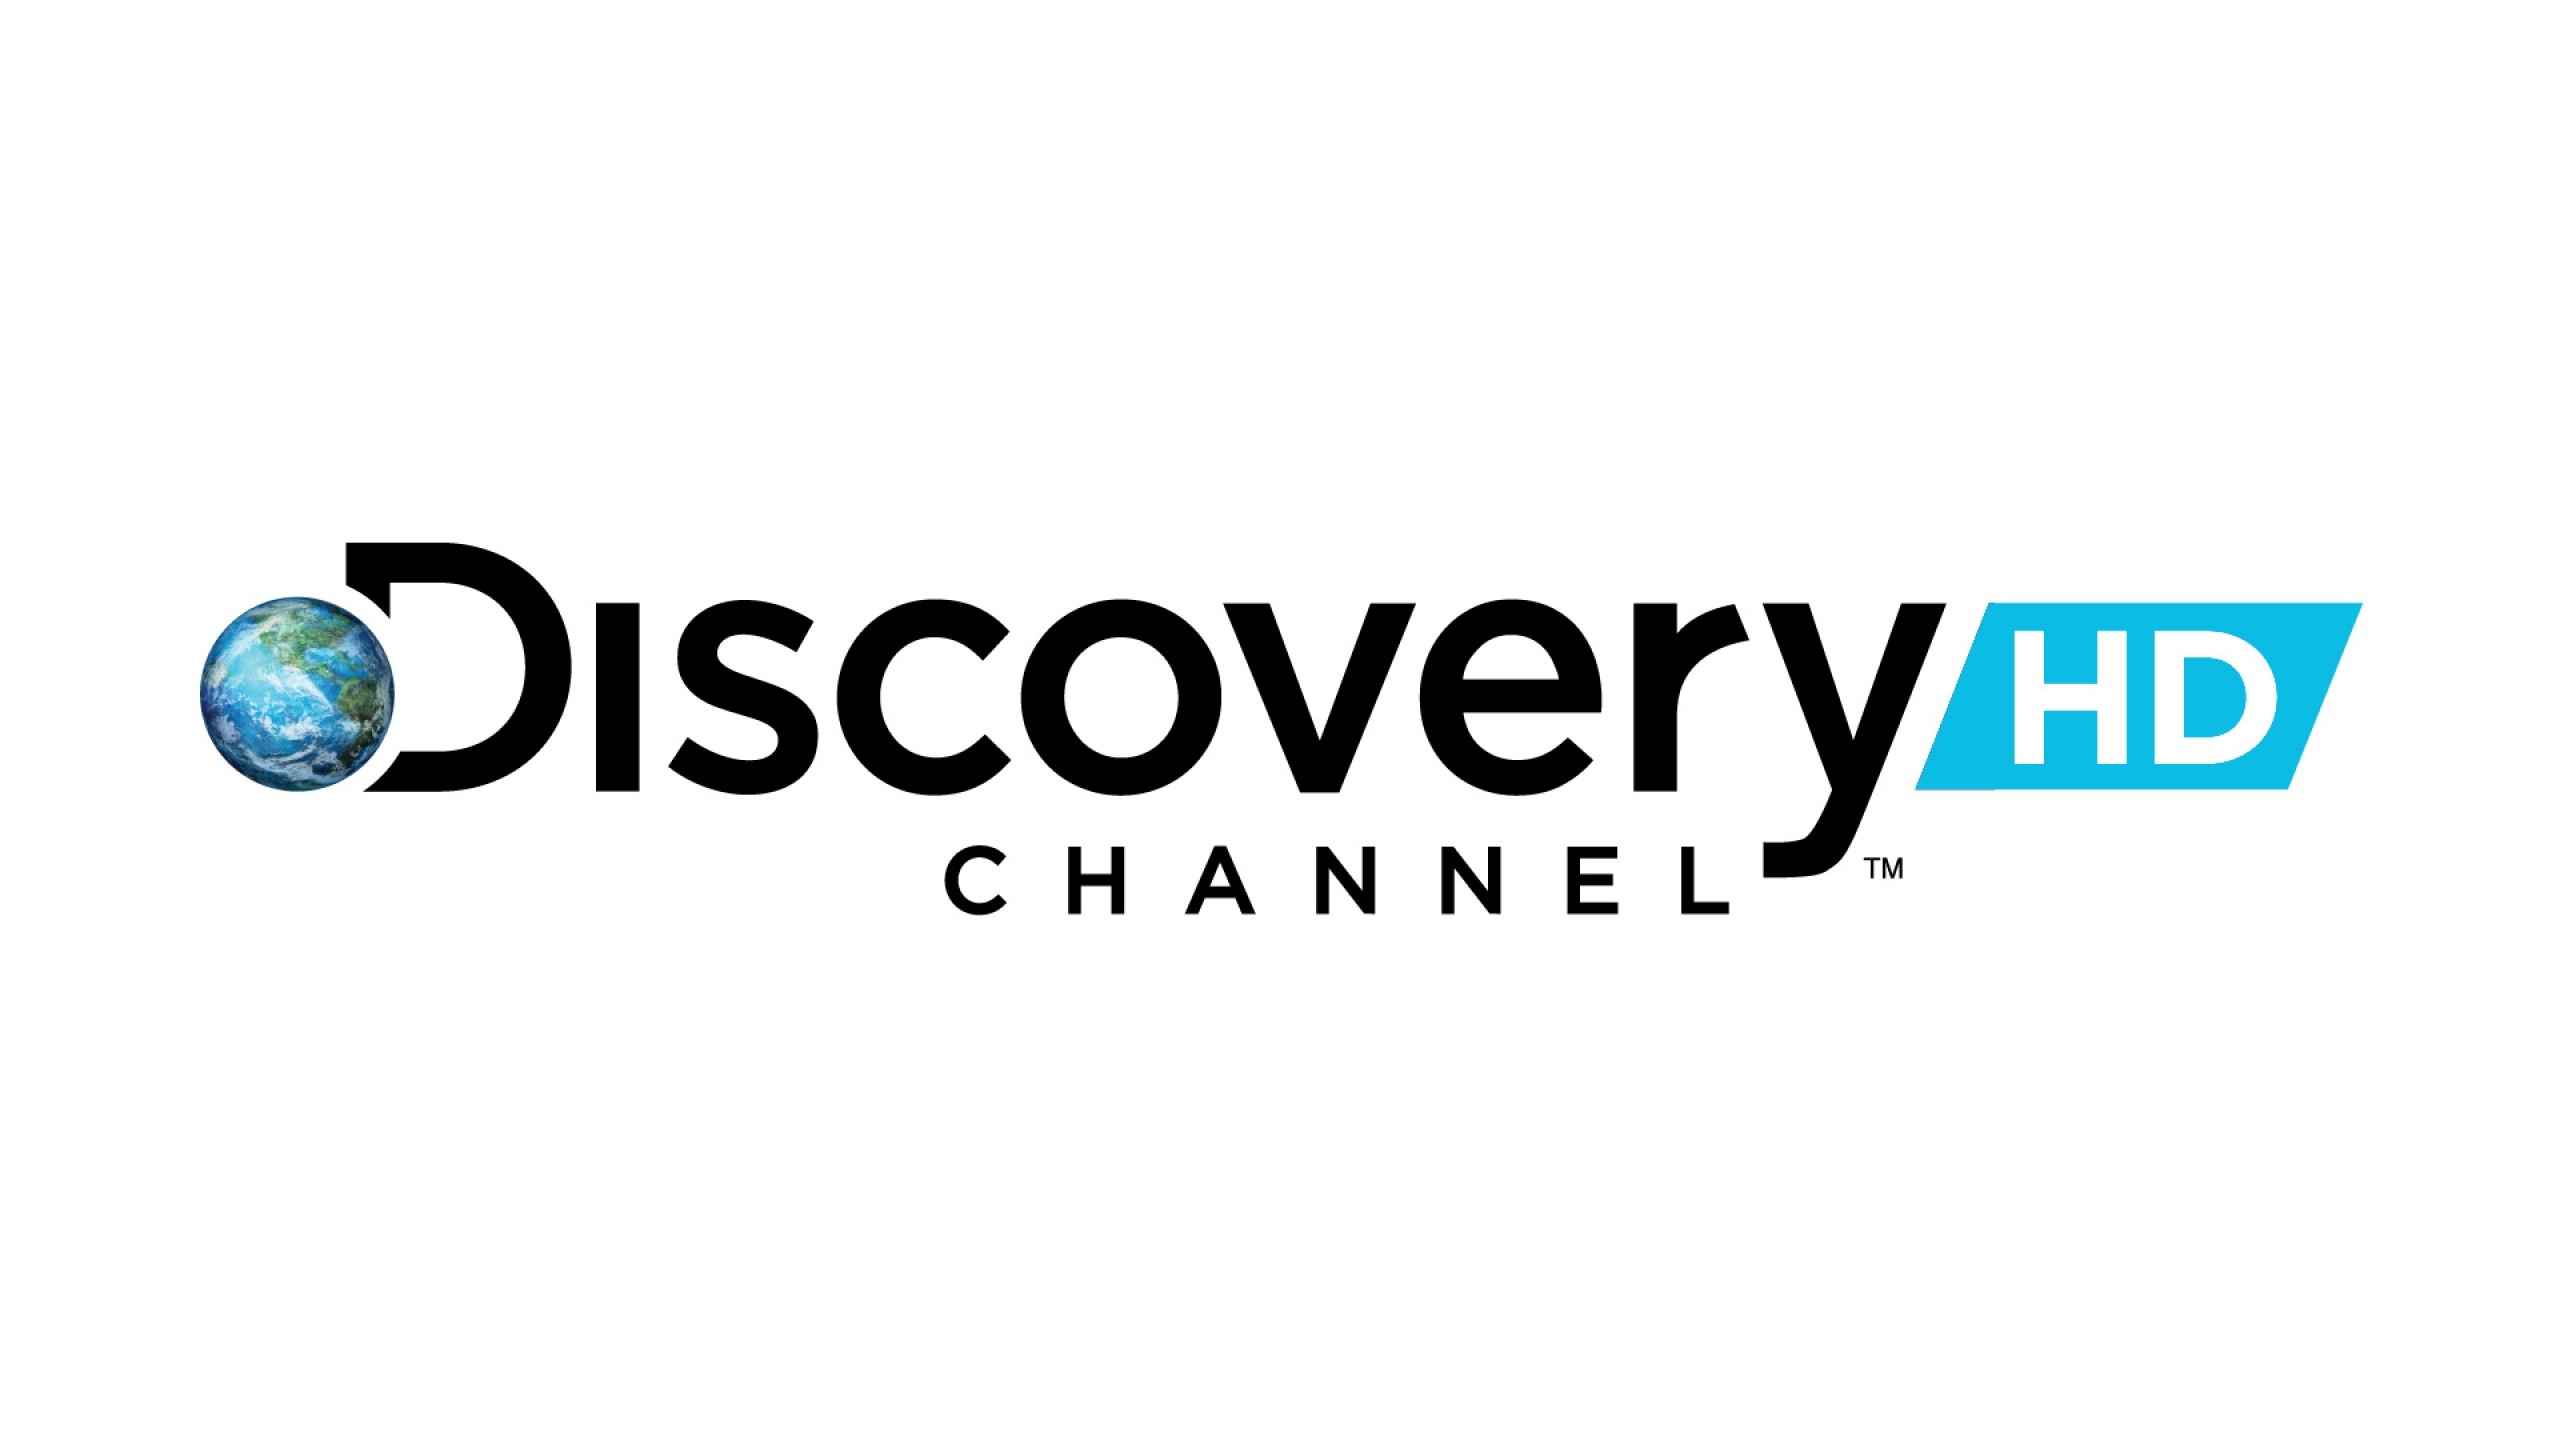 2560x1440  Wallpaper discovery hd showcase, discovery hd, channel